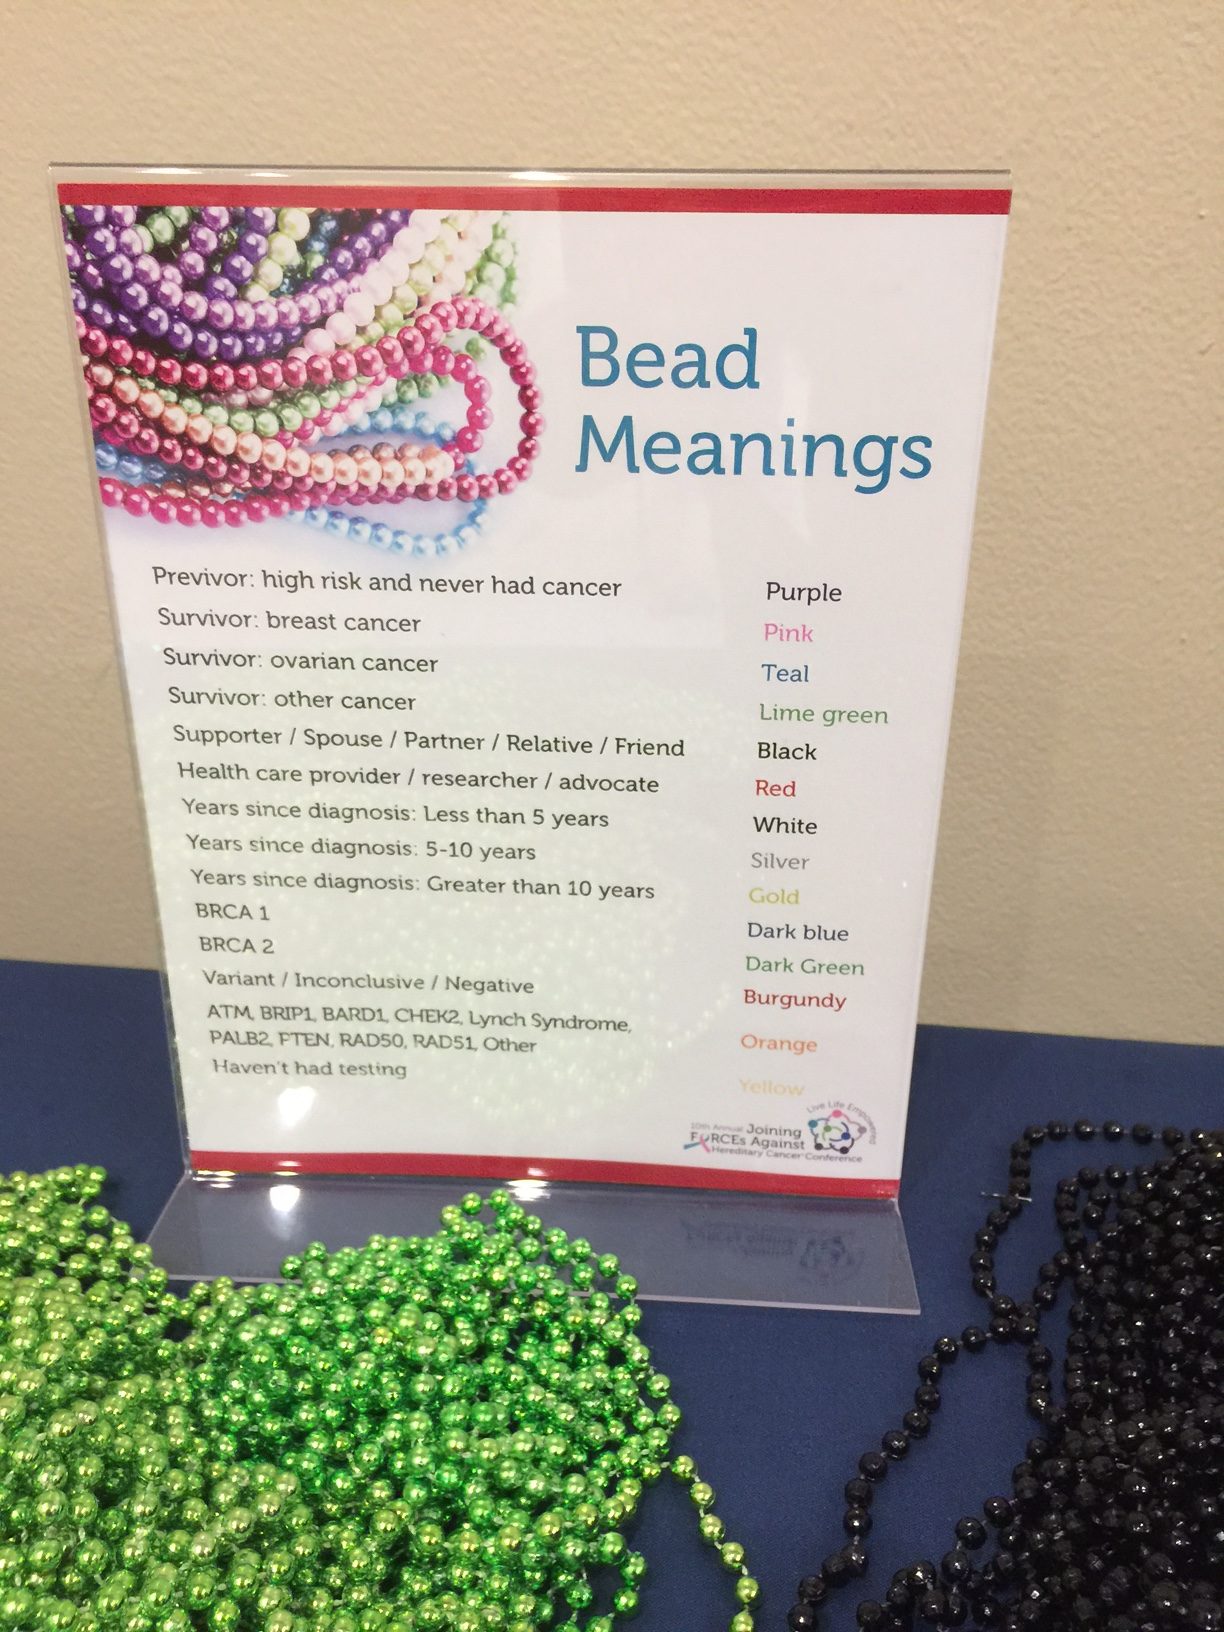 bead meanings - force conference